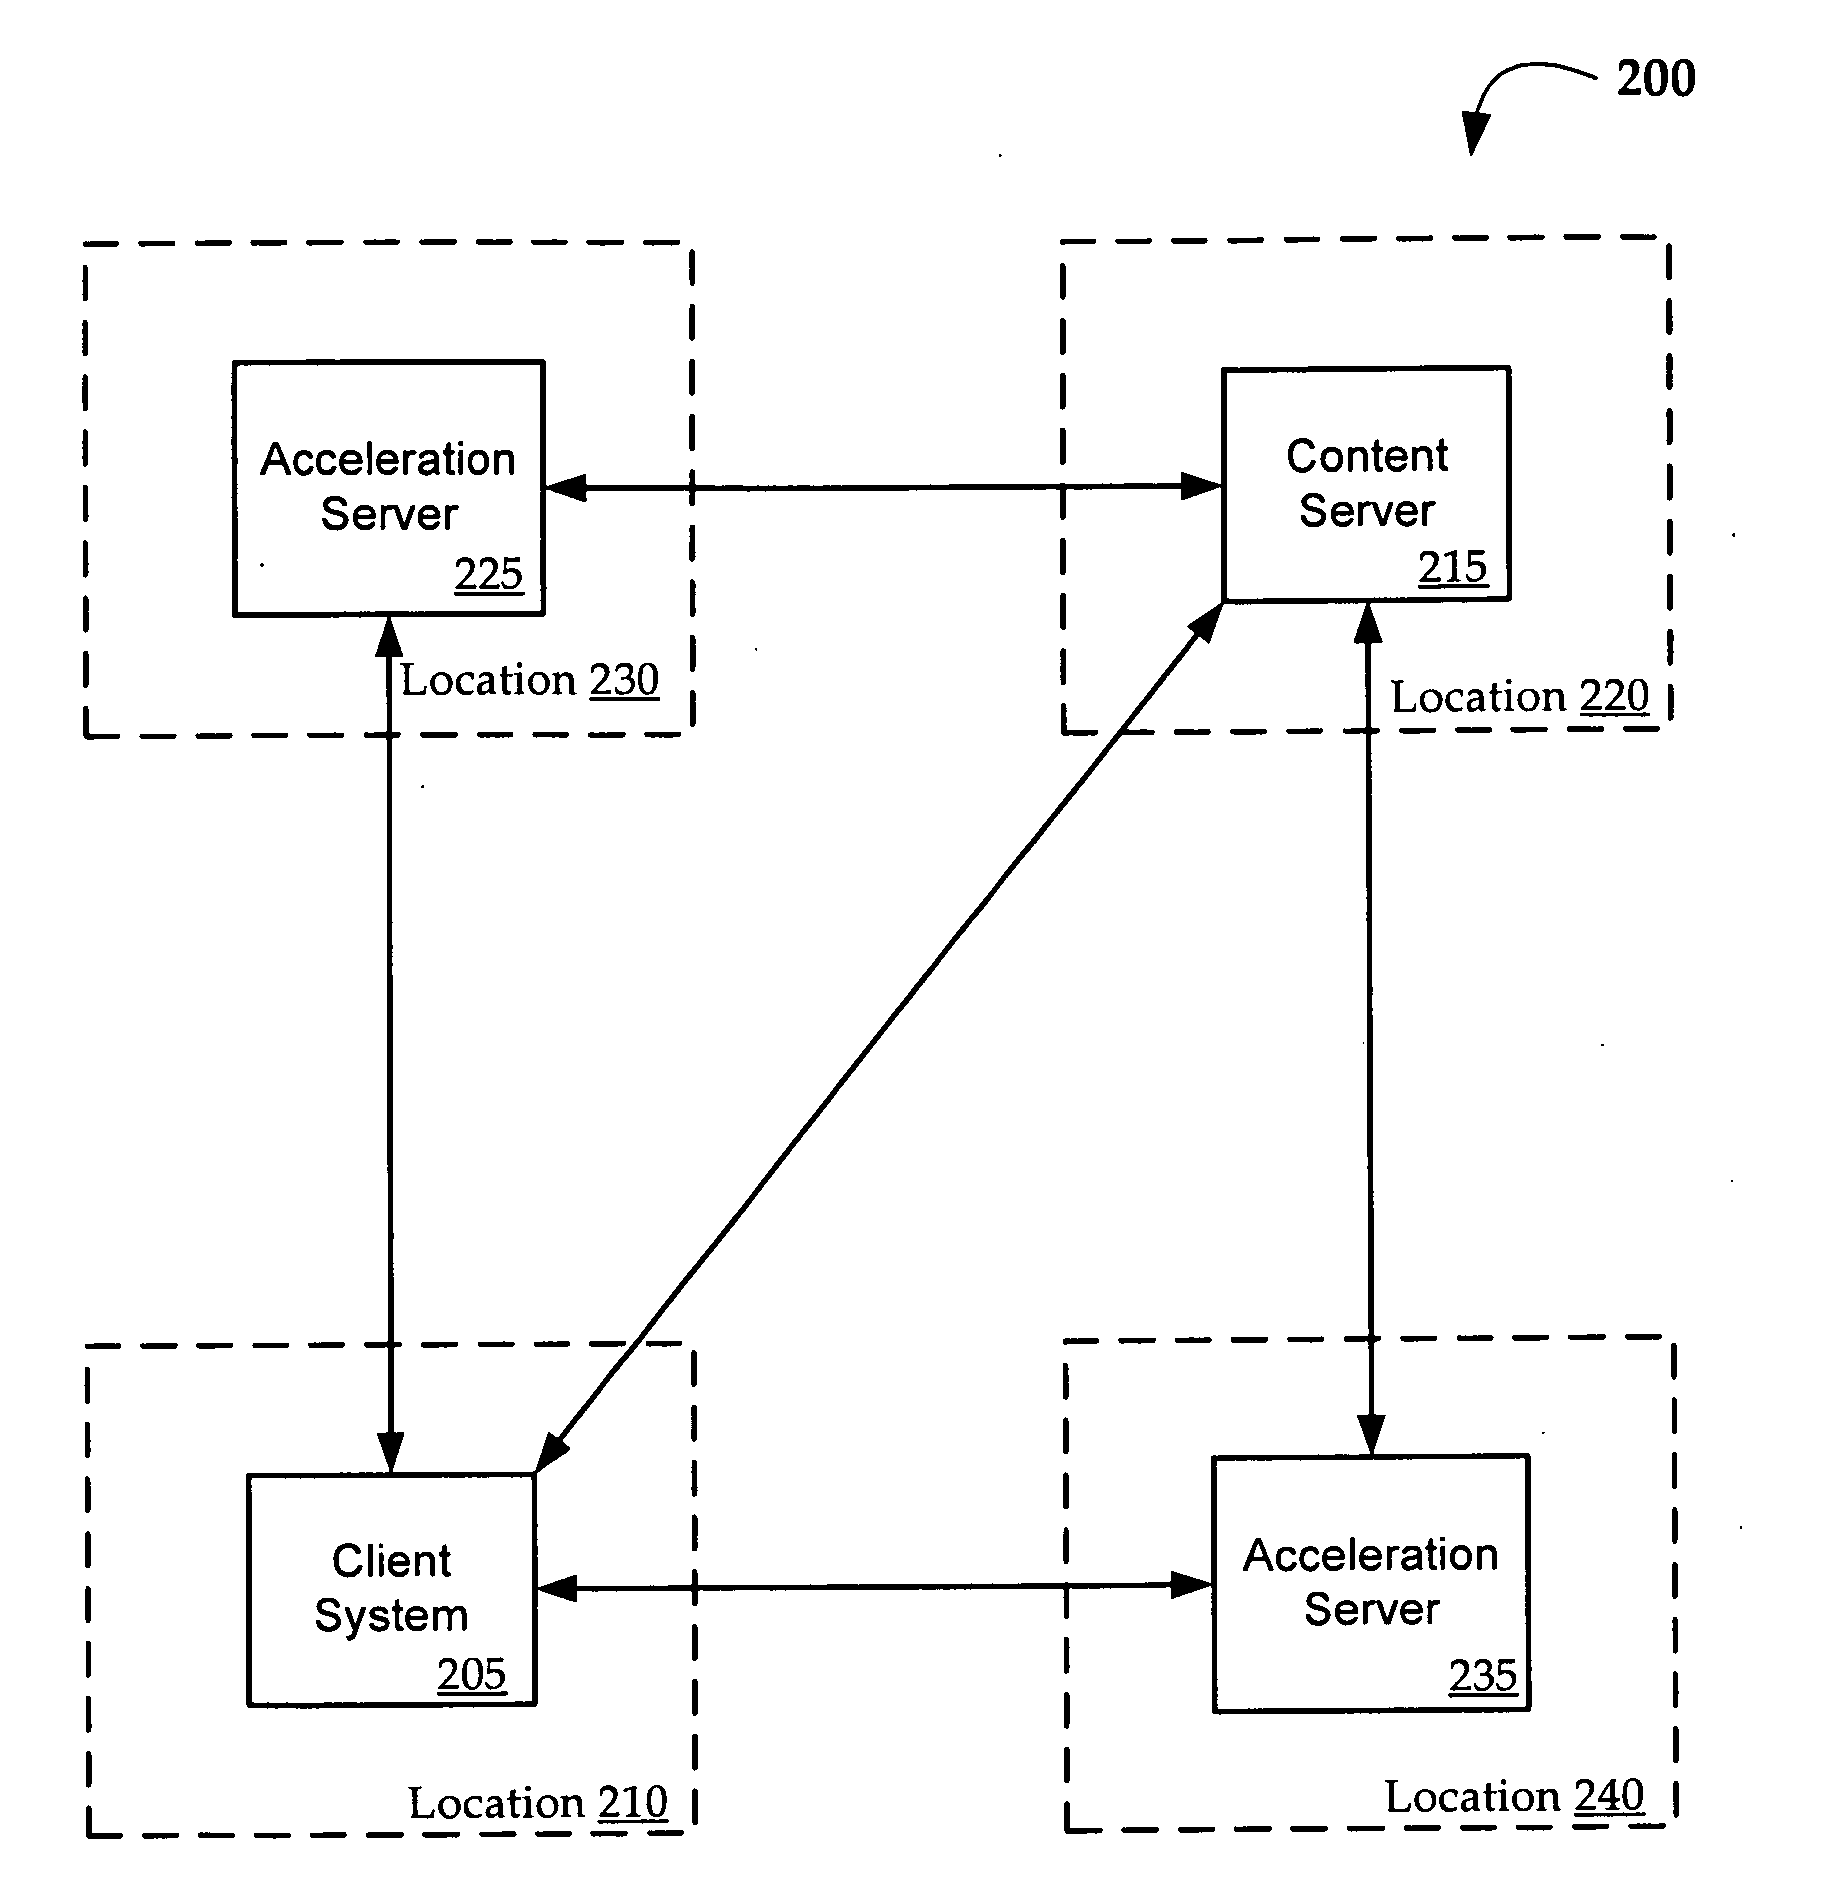 Methods and Systems for the Use of Effective Latency to Make Dynamic Routing Decisions for Optimizing Network Applications